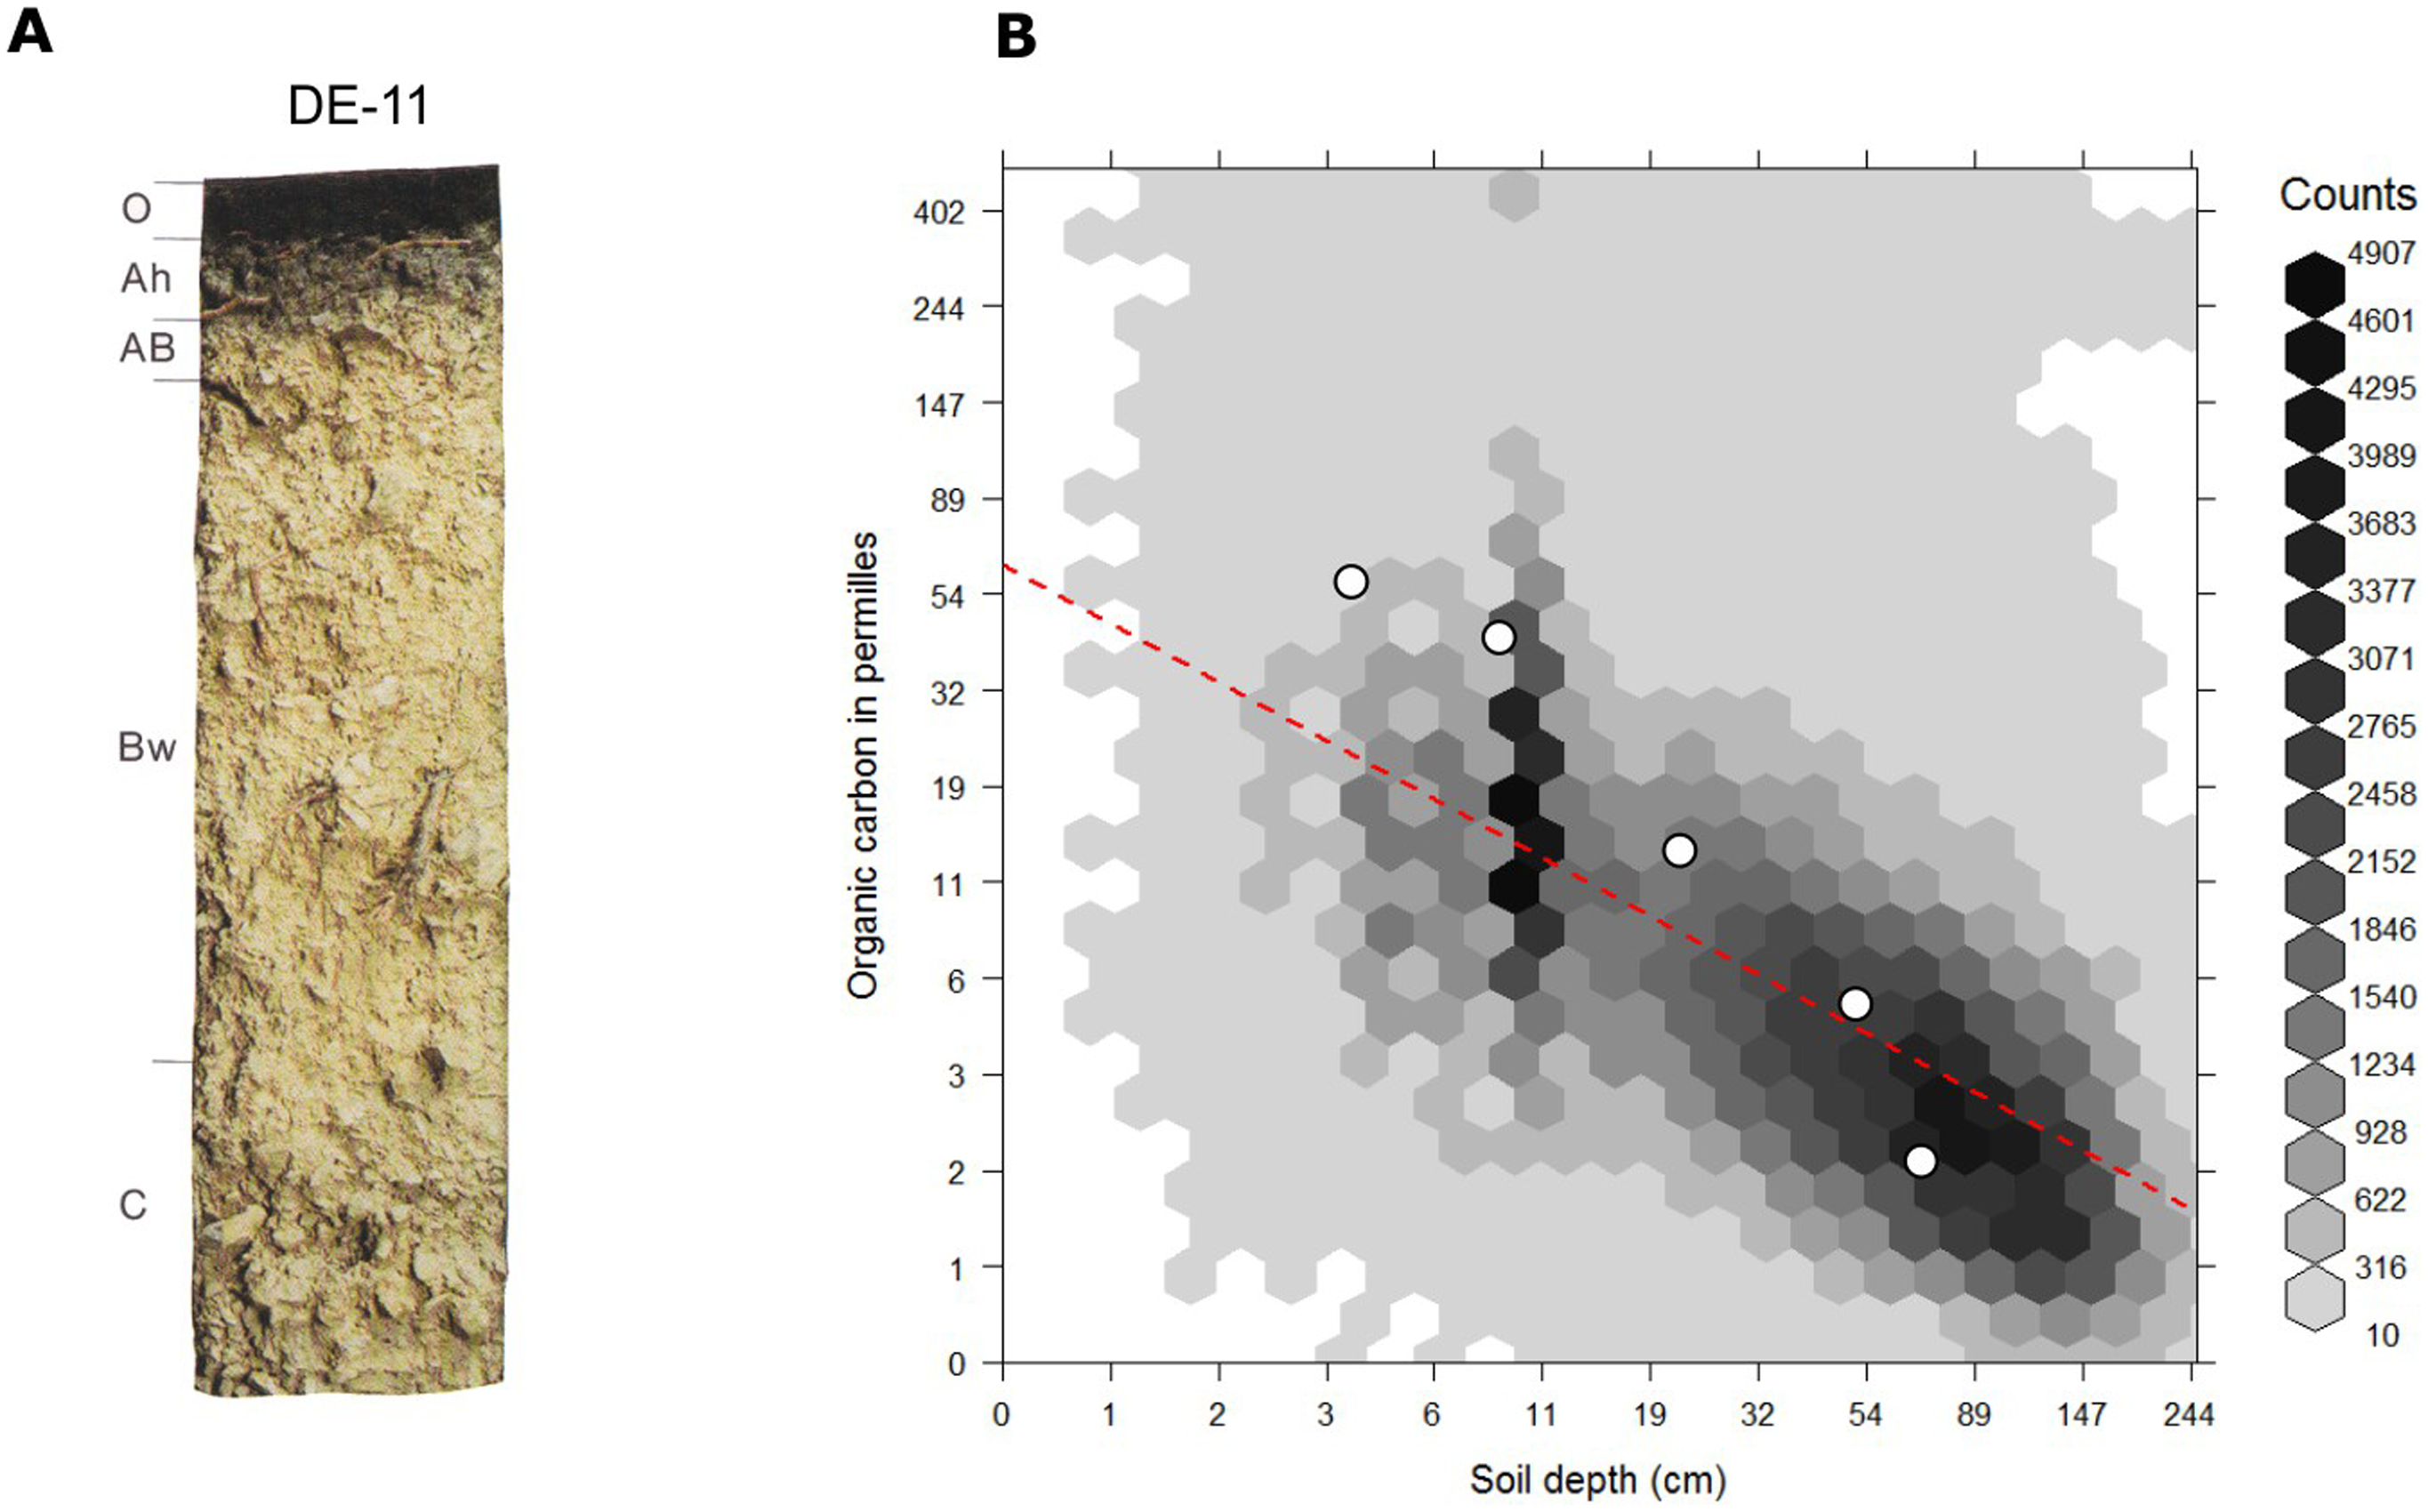 Globally fitted regression model for predicting soil organic carbon using depth only (log-log regression) and (a) individual soil profile from the ISRIC soil monolith collection. Image source: Hengl et al. (2014) doi: 10.1371/journal.pone.0105992.